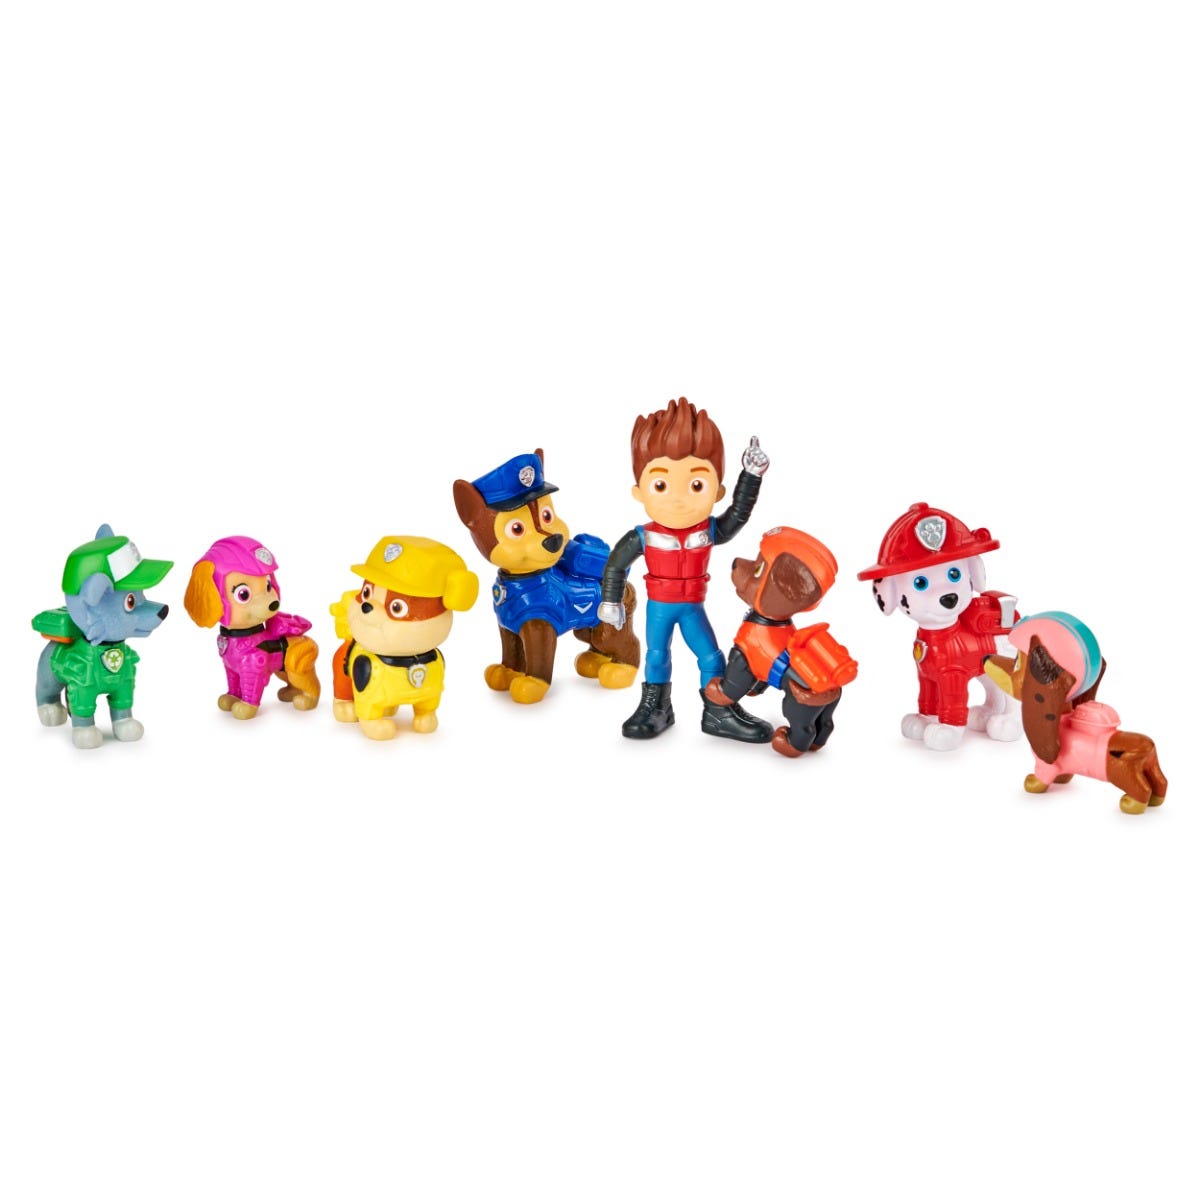 PAW Patrol Liberty Joins the Team 8 Figure Movie Gift Pack with Exclusive Collectible Figure Kids’ Toys for Ages 3 and Up 